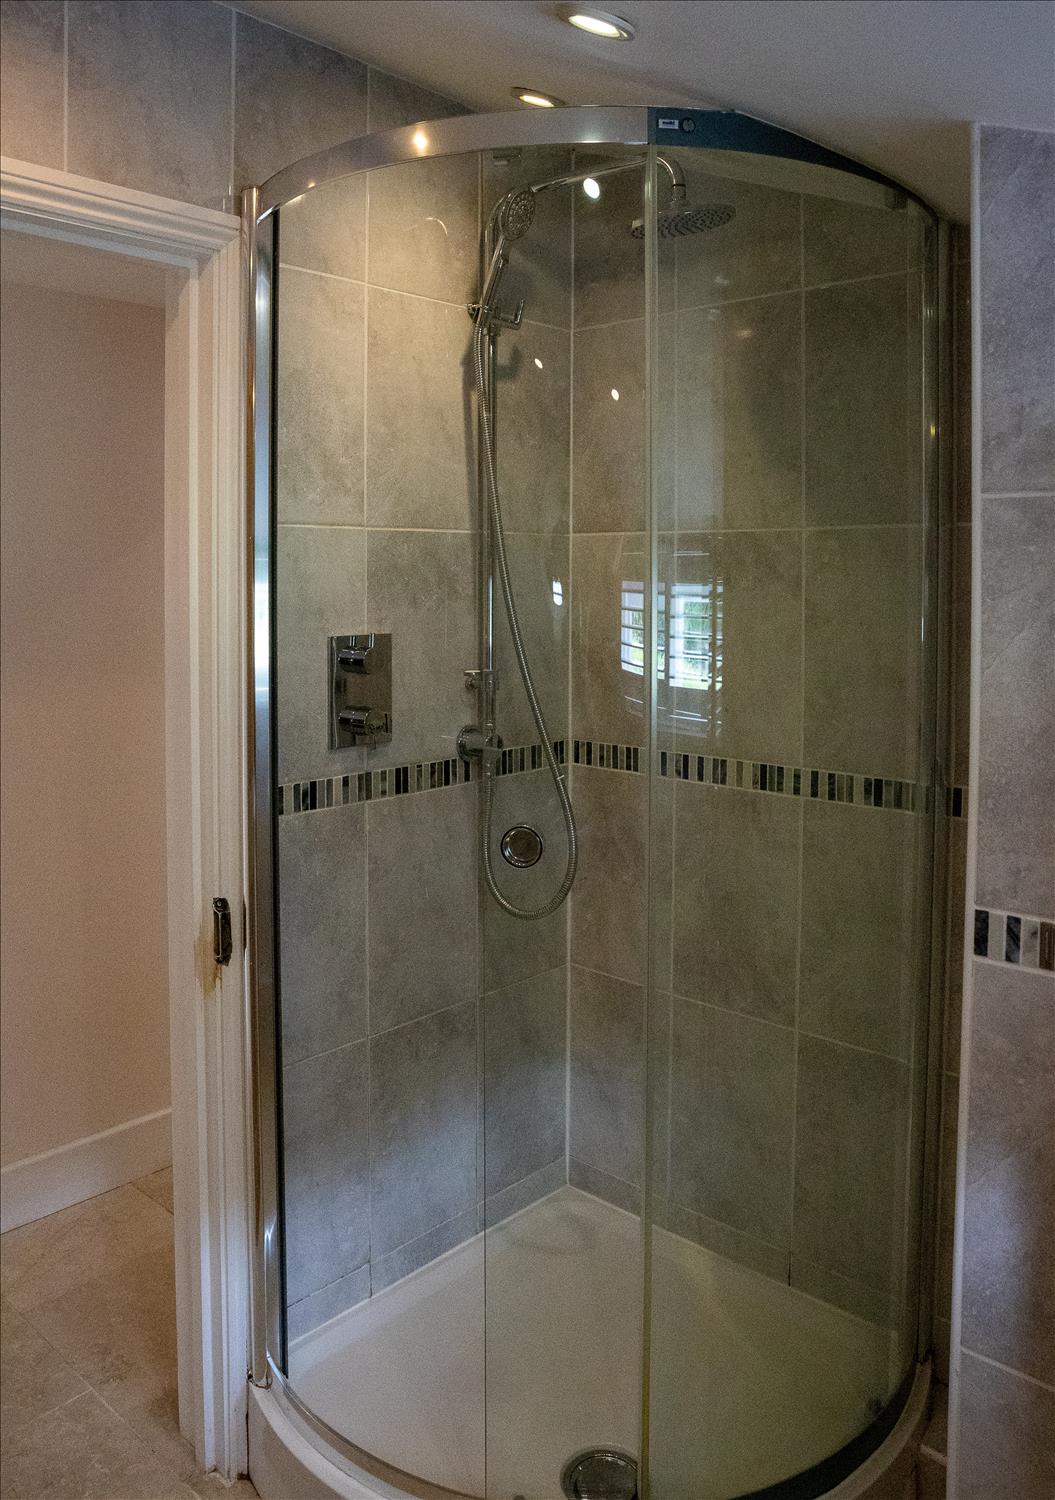 Additional en-suite shower room downstairs for long holiday beach walks